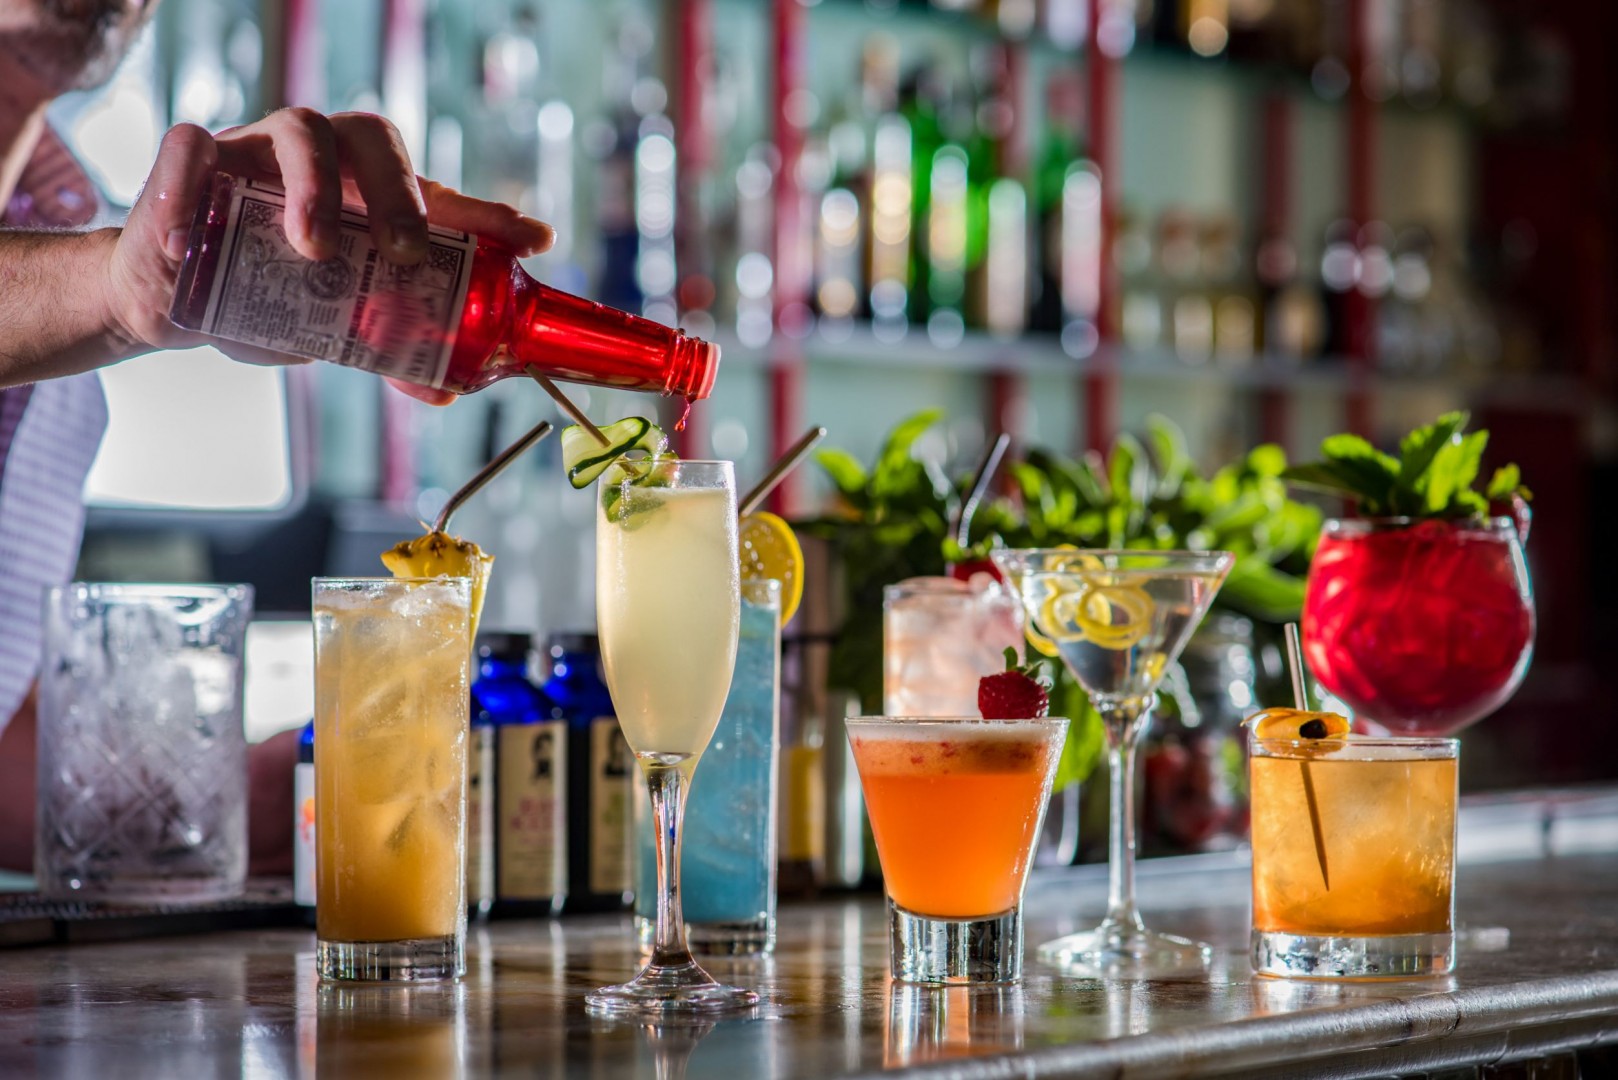 bartender's hand pouring beverage into a cocktail glass, surrounded by other cocktails of different colors and glass styles